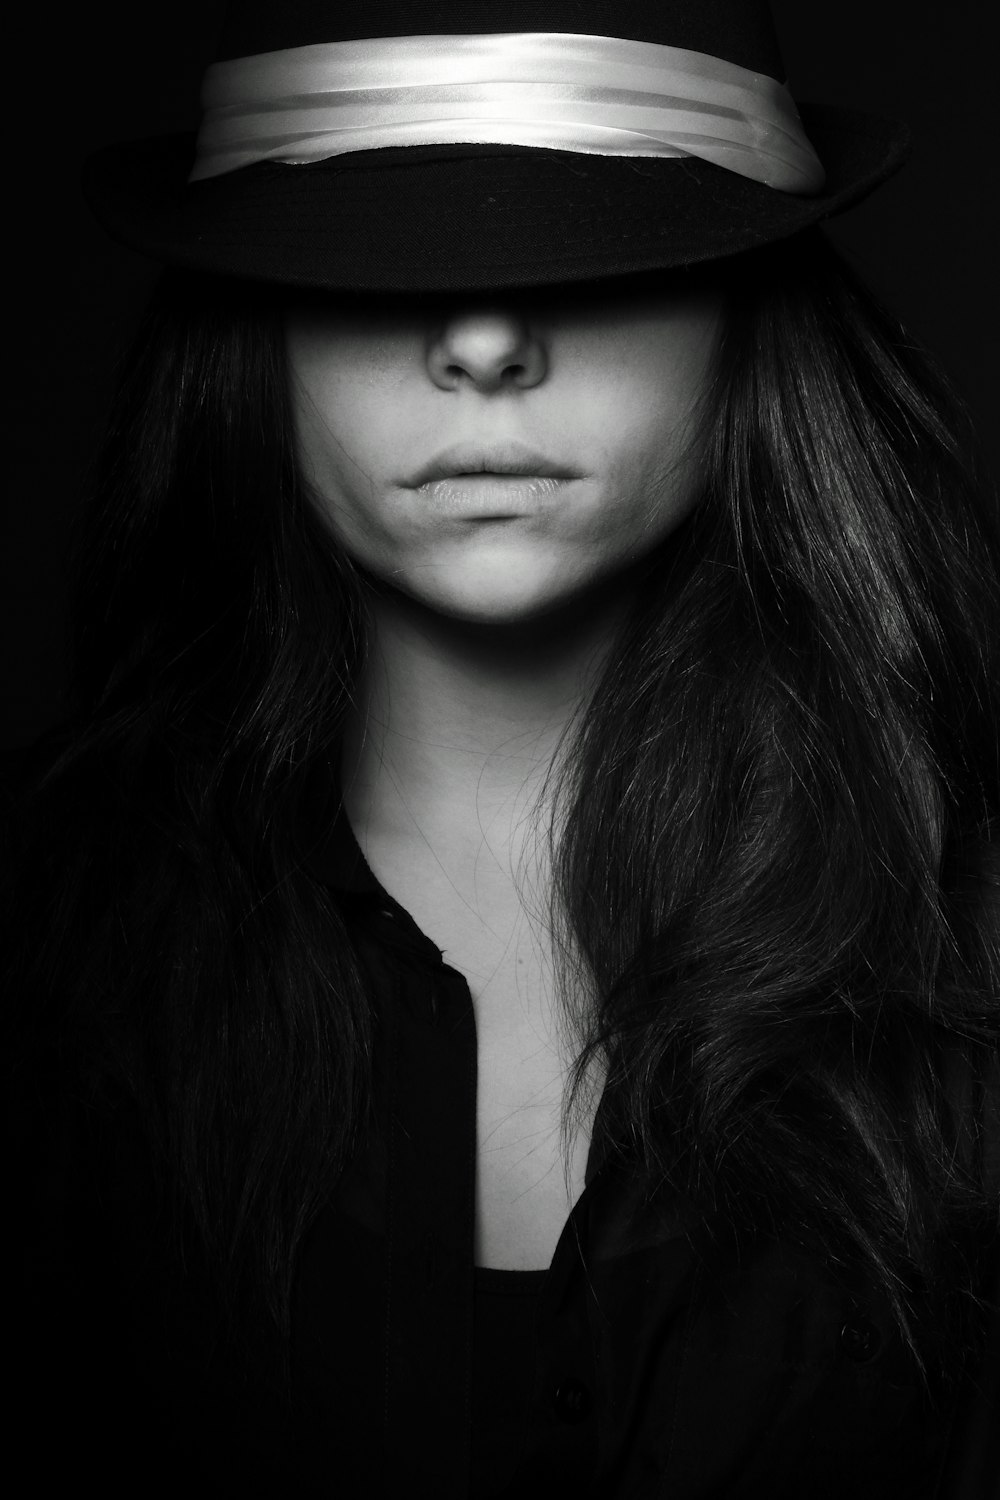 grayscale photo of woman wearing black hat